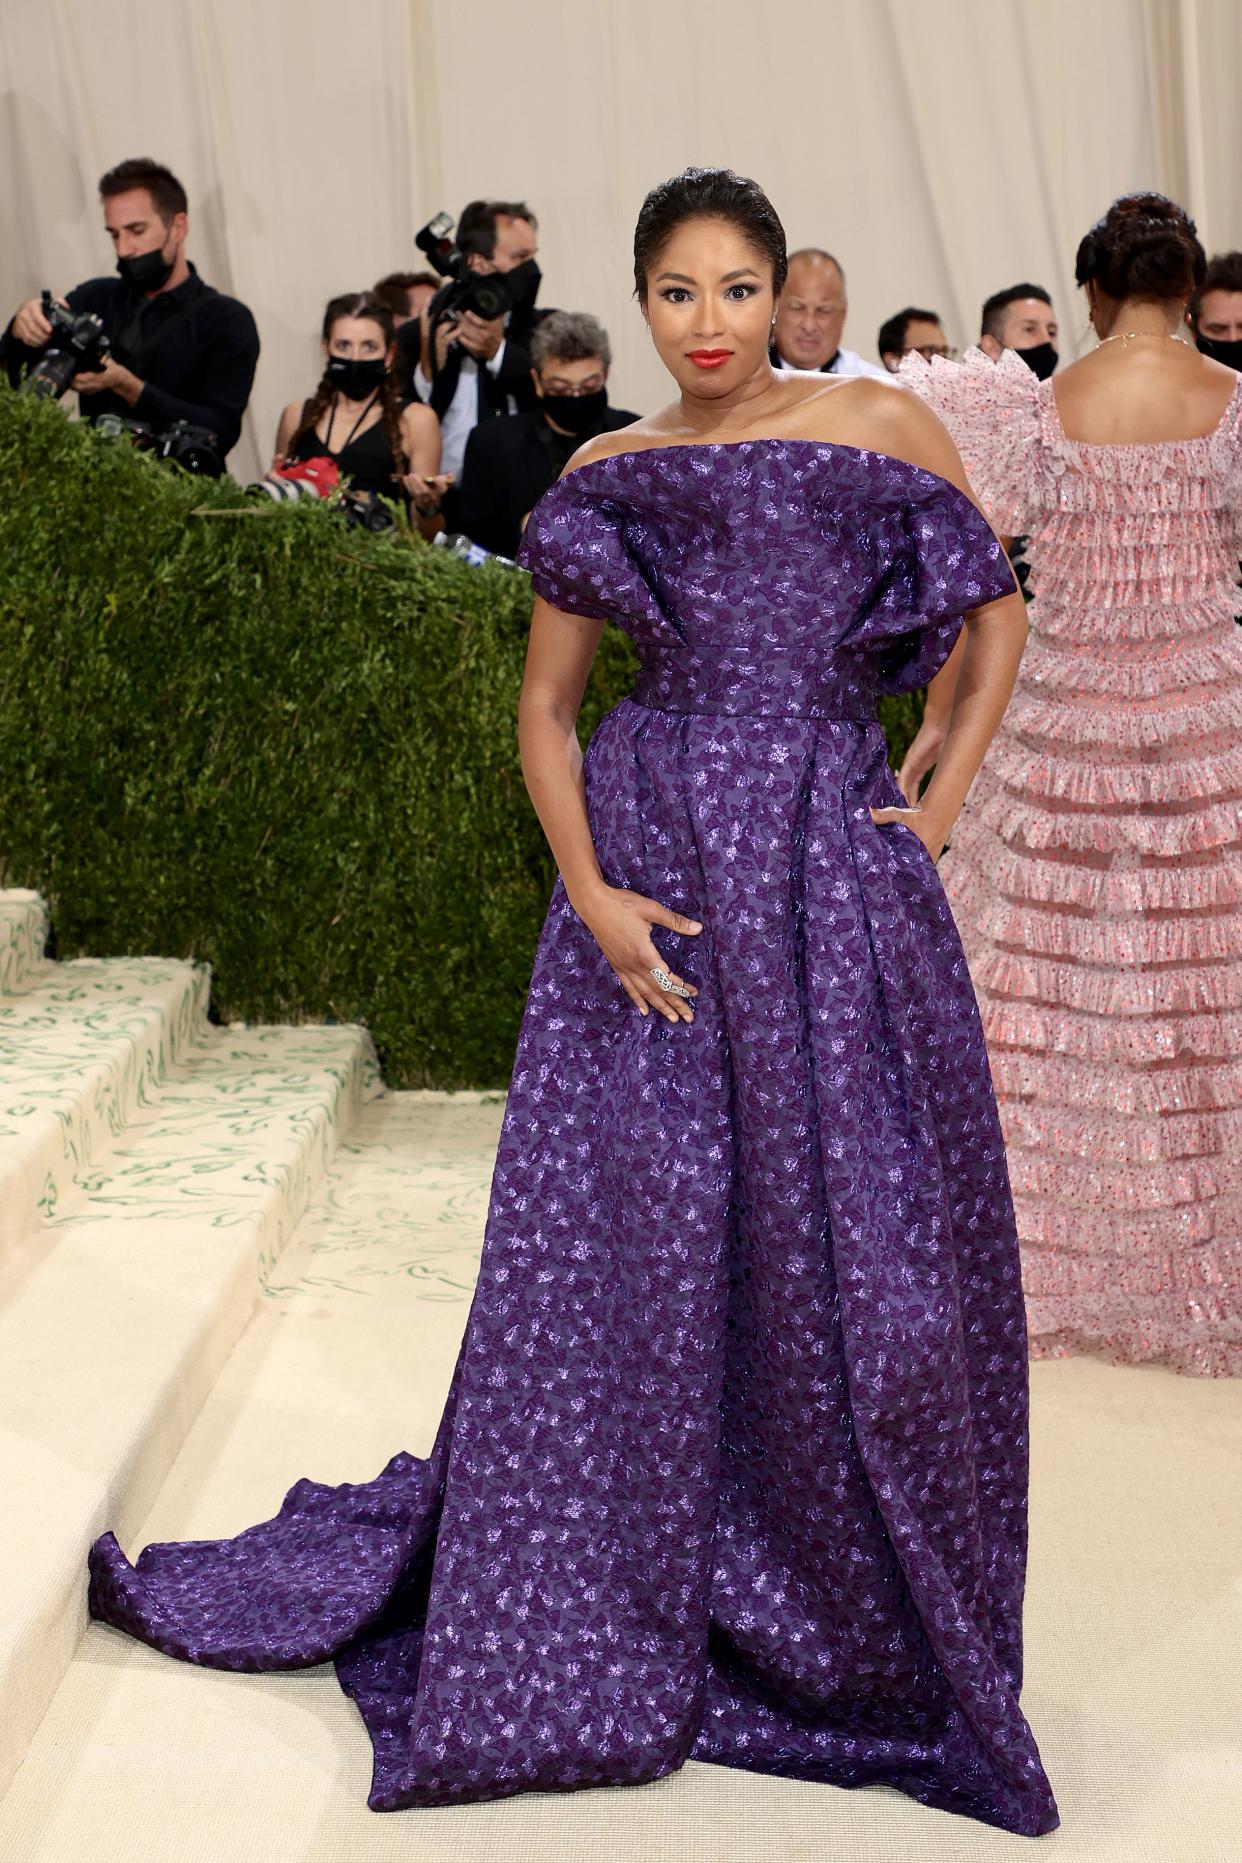 Alicia Quarles attends The 2021 Met Gala Celebrating In America: A Lexicon Of Fashion at Metropolitan Museum of Art on Sept. 13, 2021 in New York.